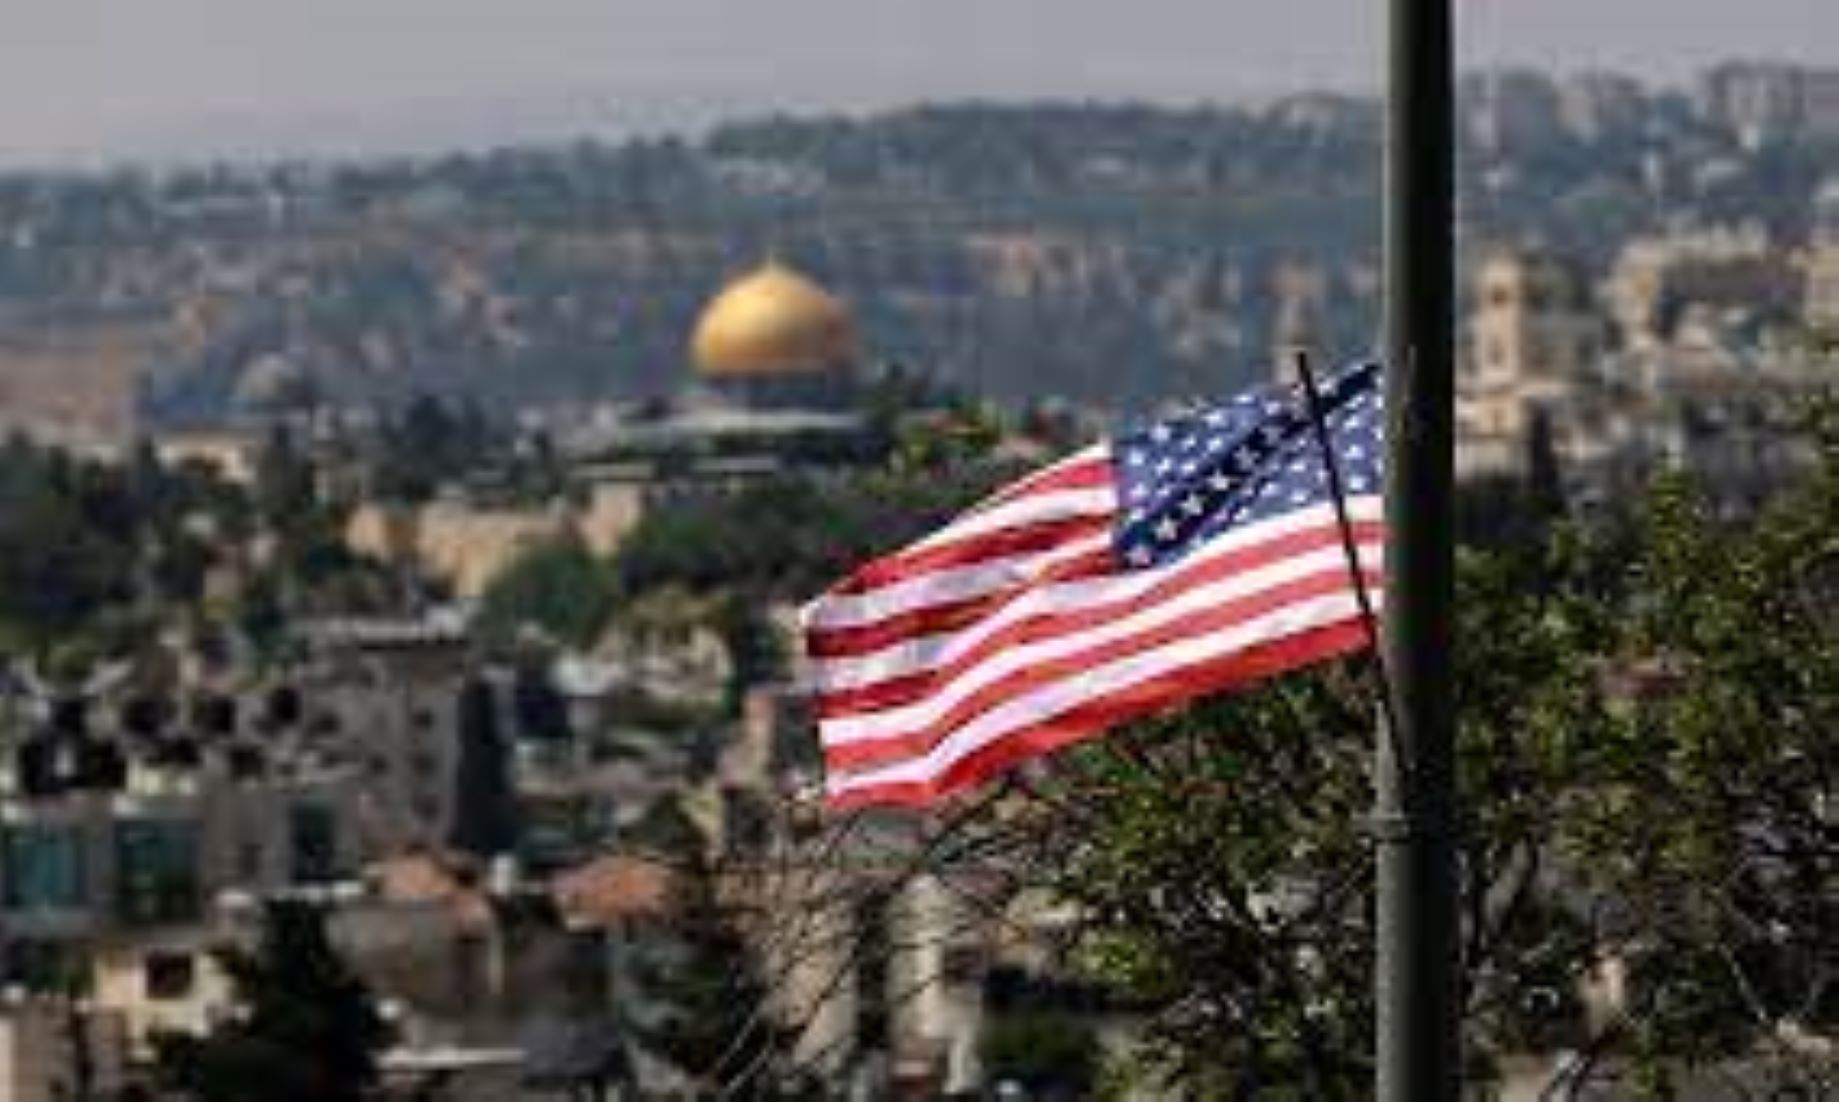 PLO Holds U.S. Responsible For Impeding Peace Process In Middle East